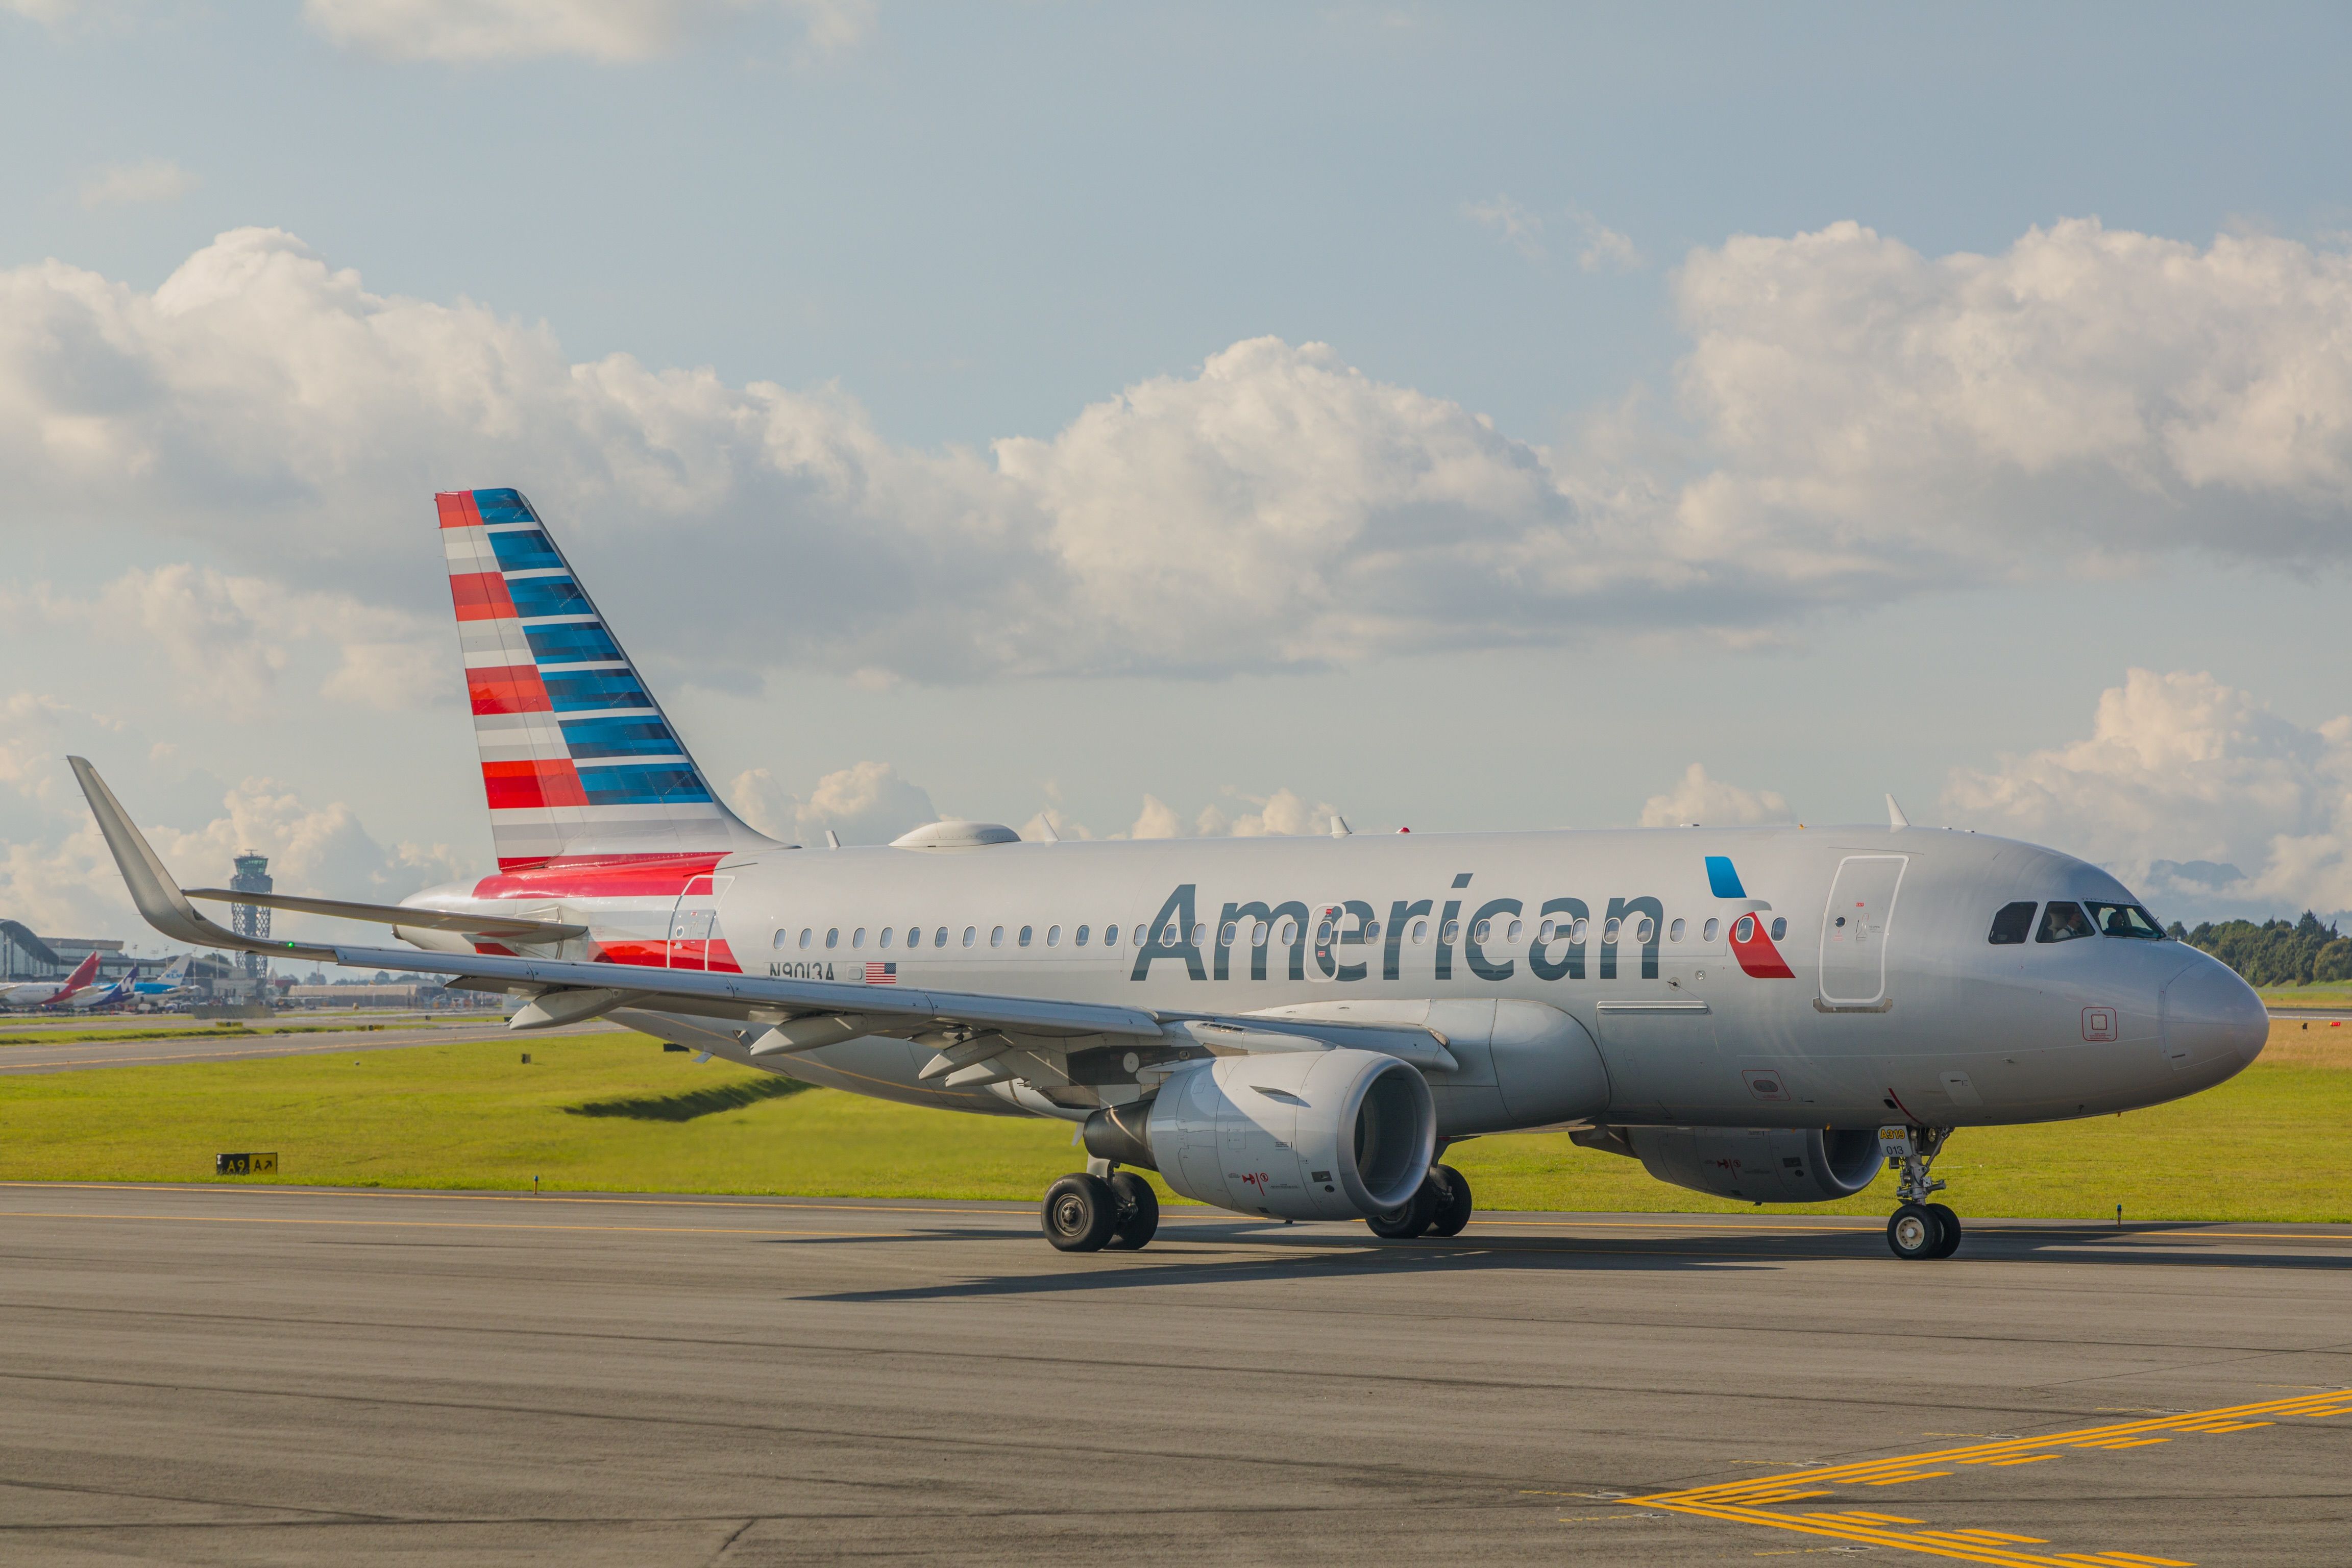 An American Airlines Airbus A319 standing on the taxiway